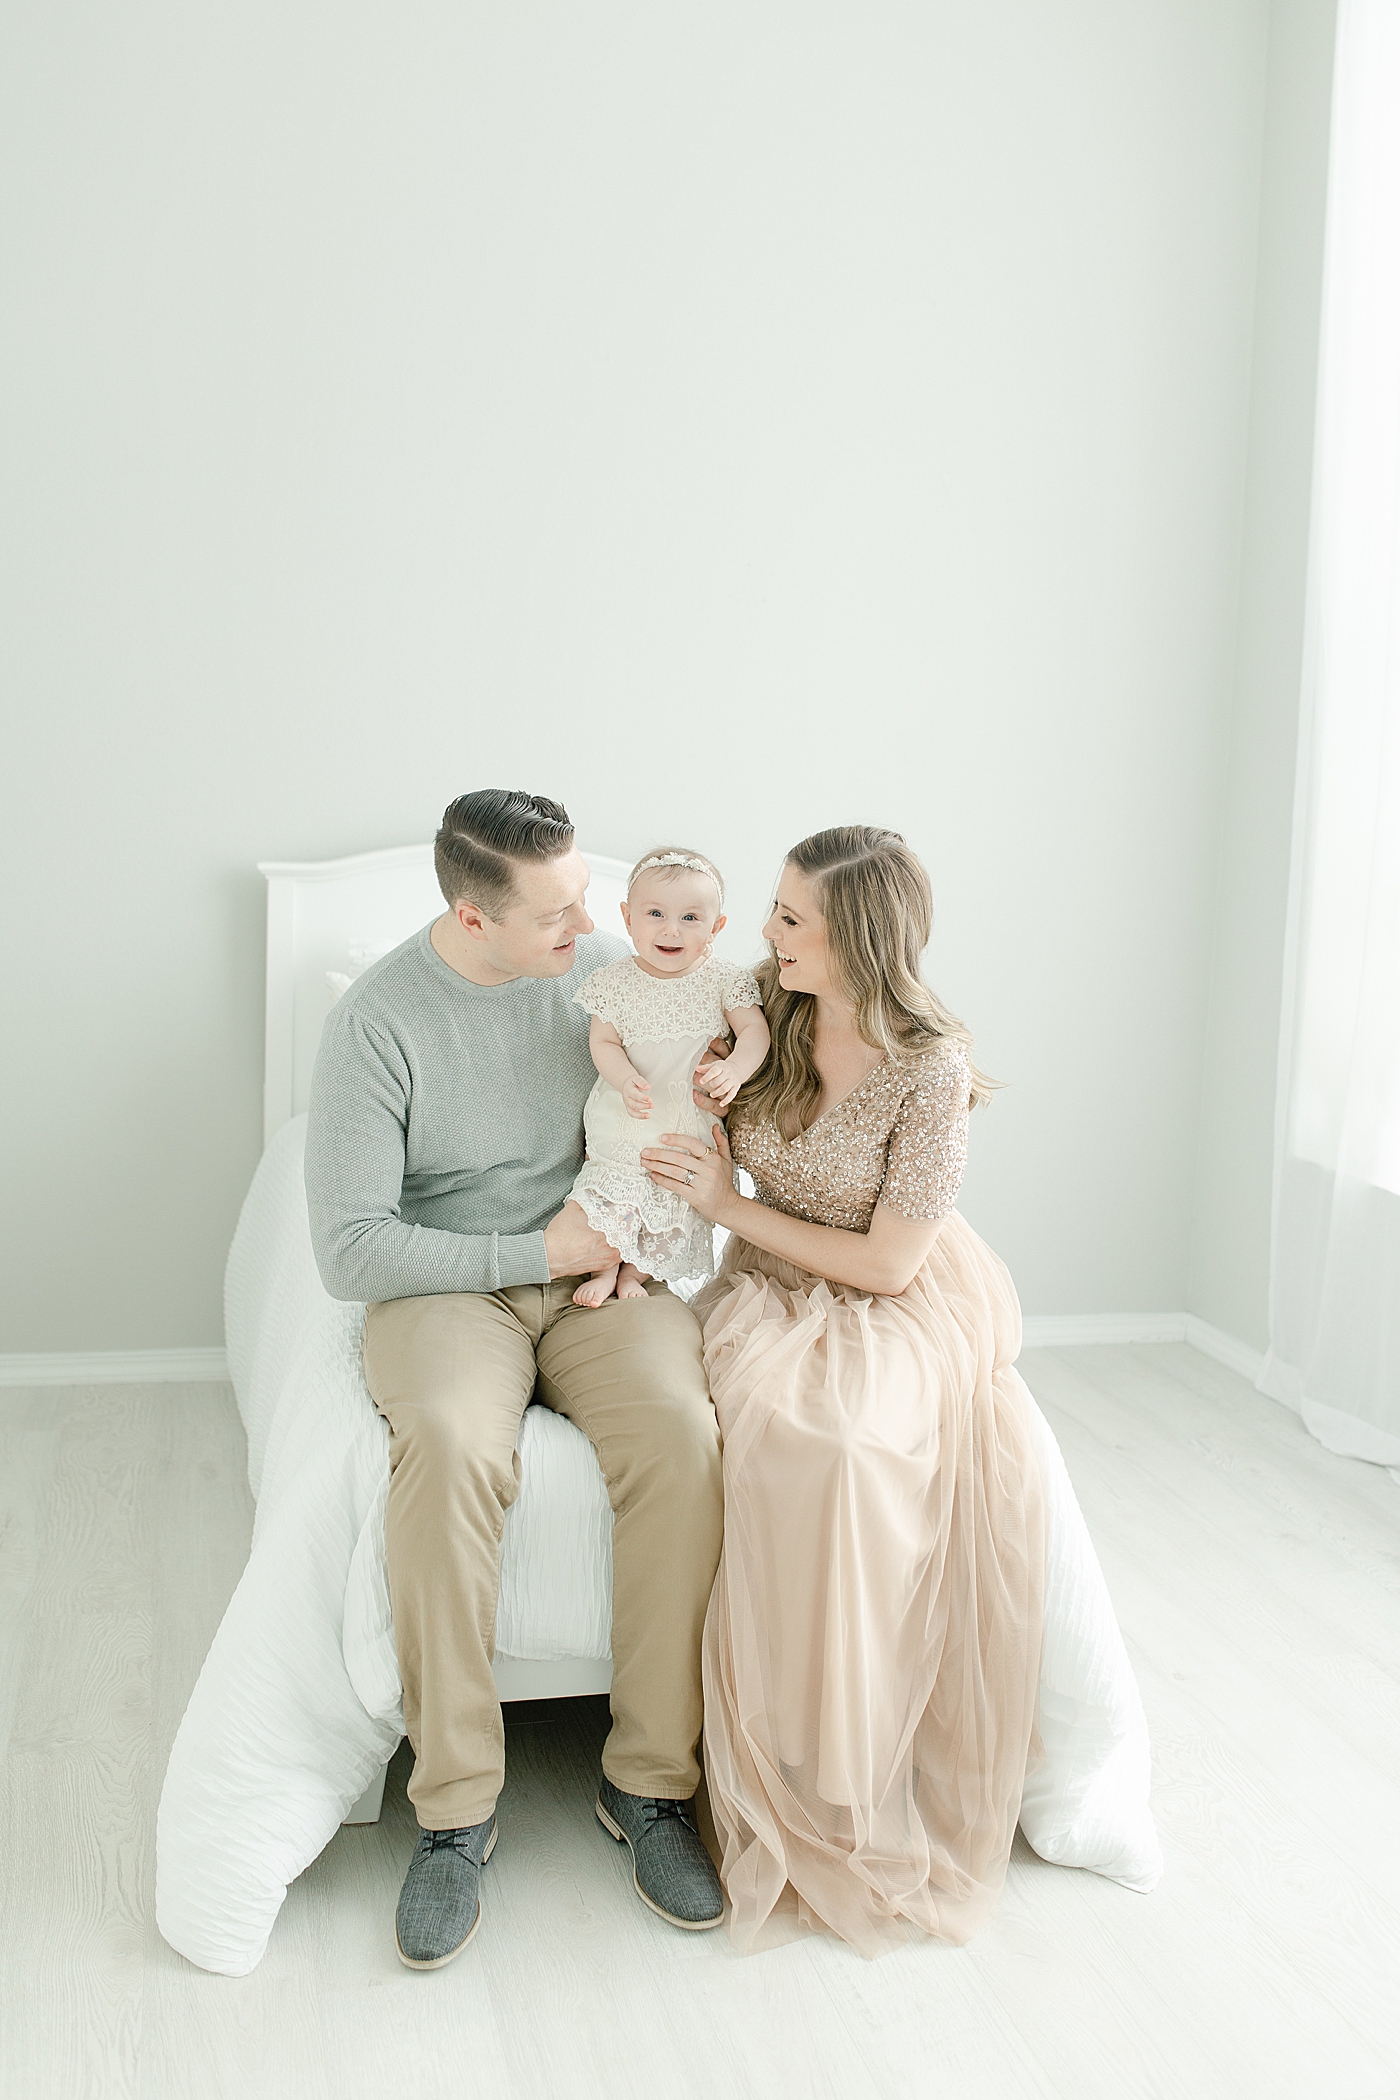 Mom and dad helping their baby girl stand | Photo by Little Sunshine Photography